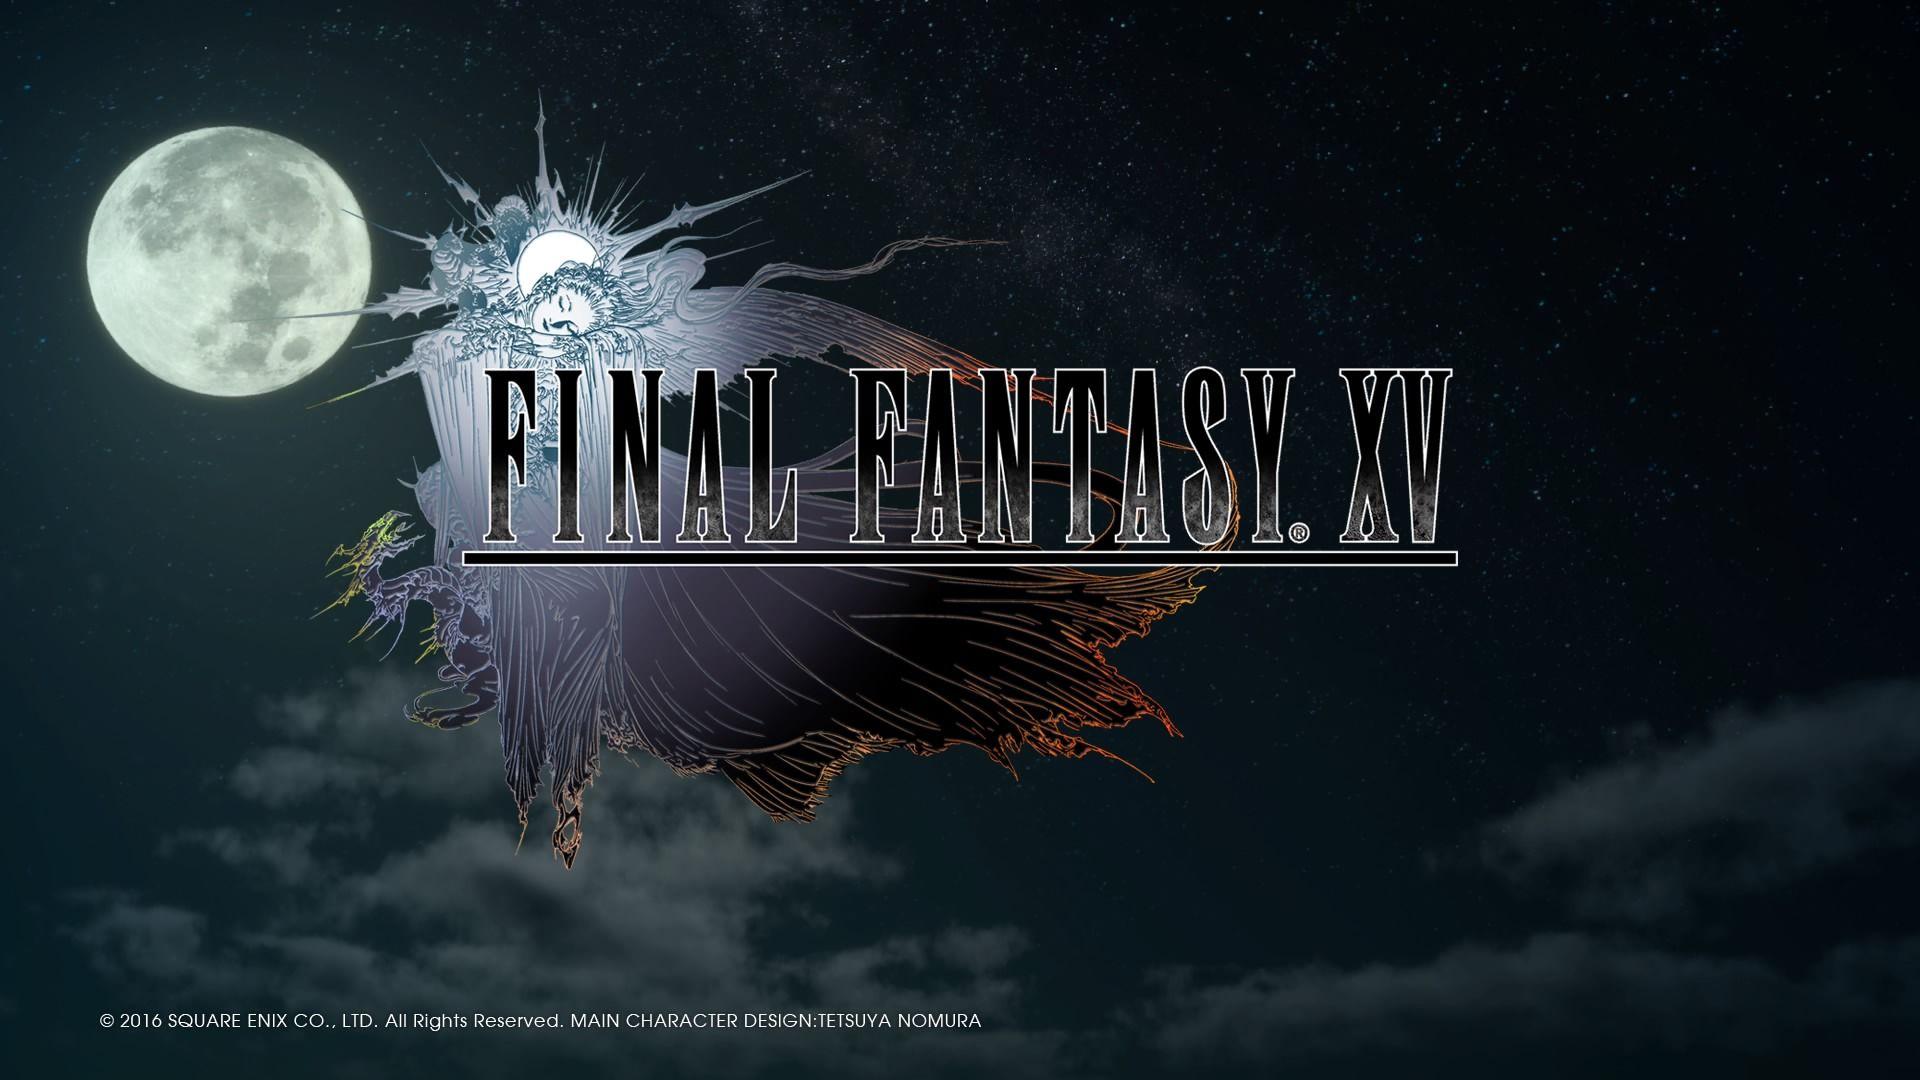 Preview the New Legacy of Final Fantasy XV in Latest Trailer